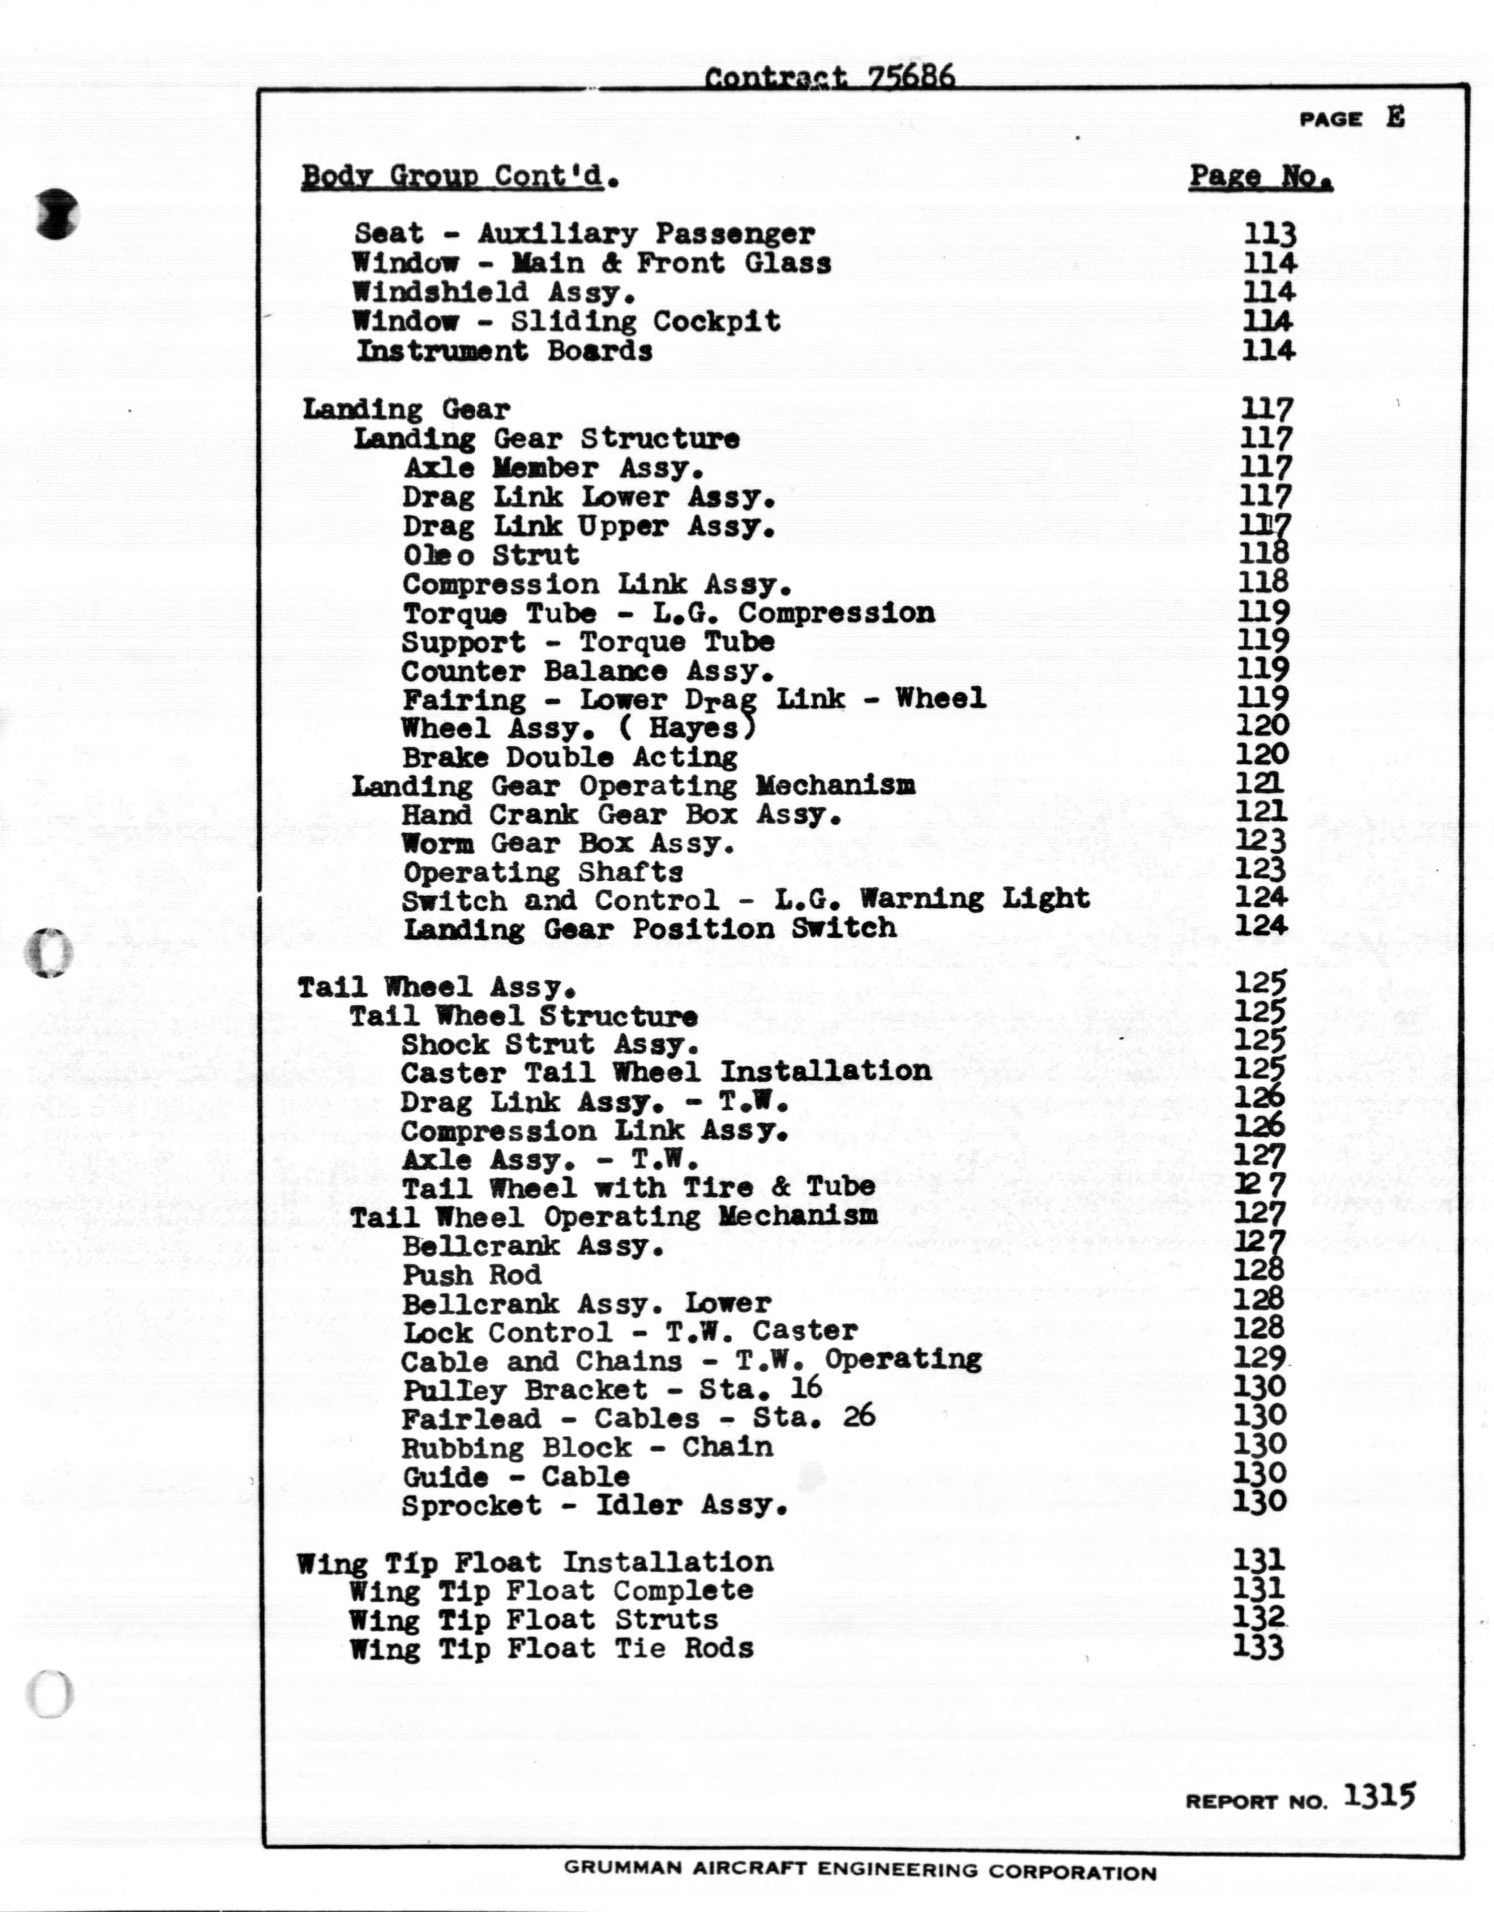 Sample page 5 from AirCorps Library document: Final Spare Parts List with Prices for JRF-4 and -5 Airplanes